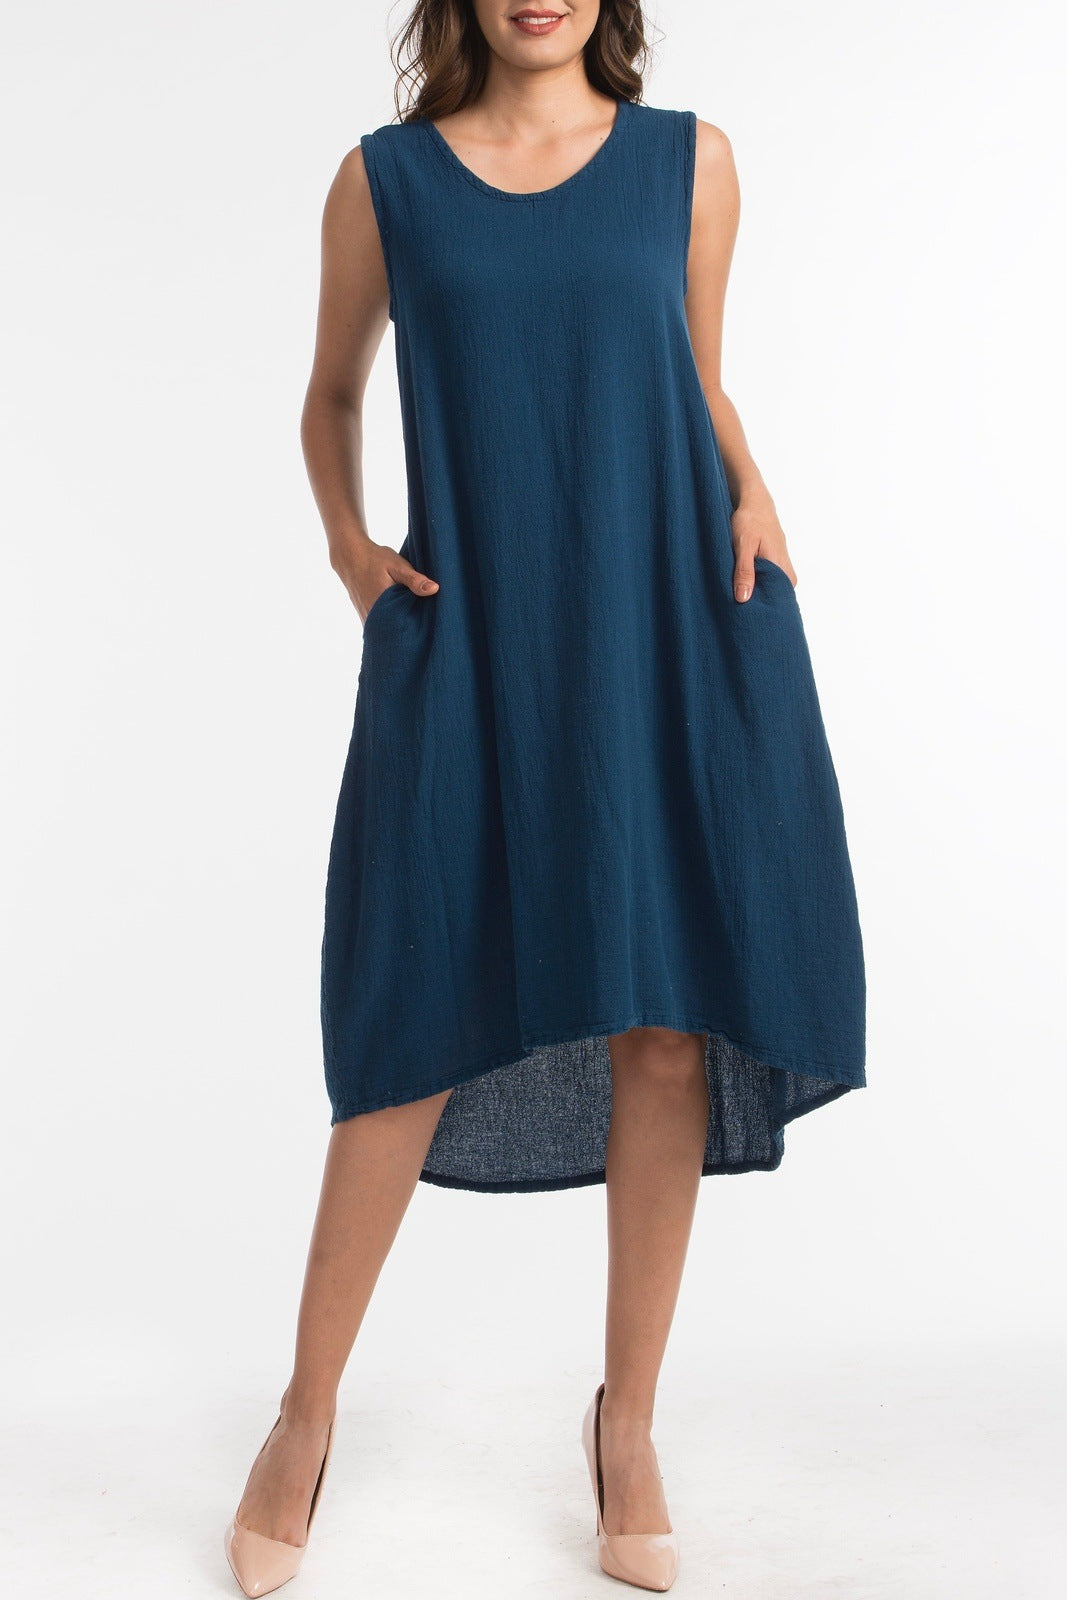 Ellie Dress with POCKETS! Brand New Sale Colors!